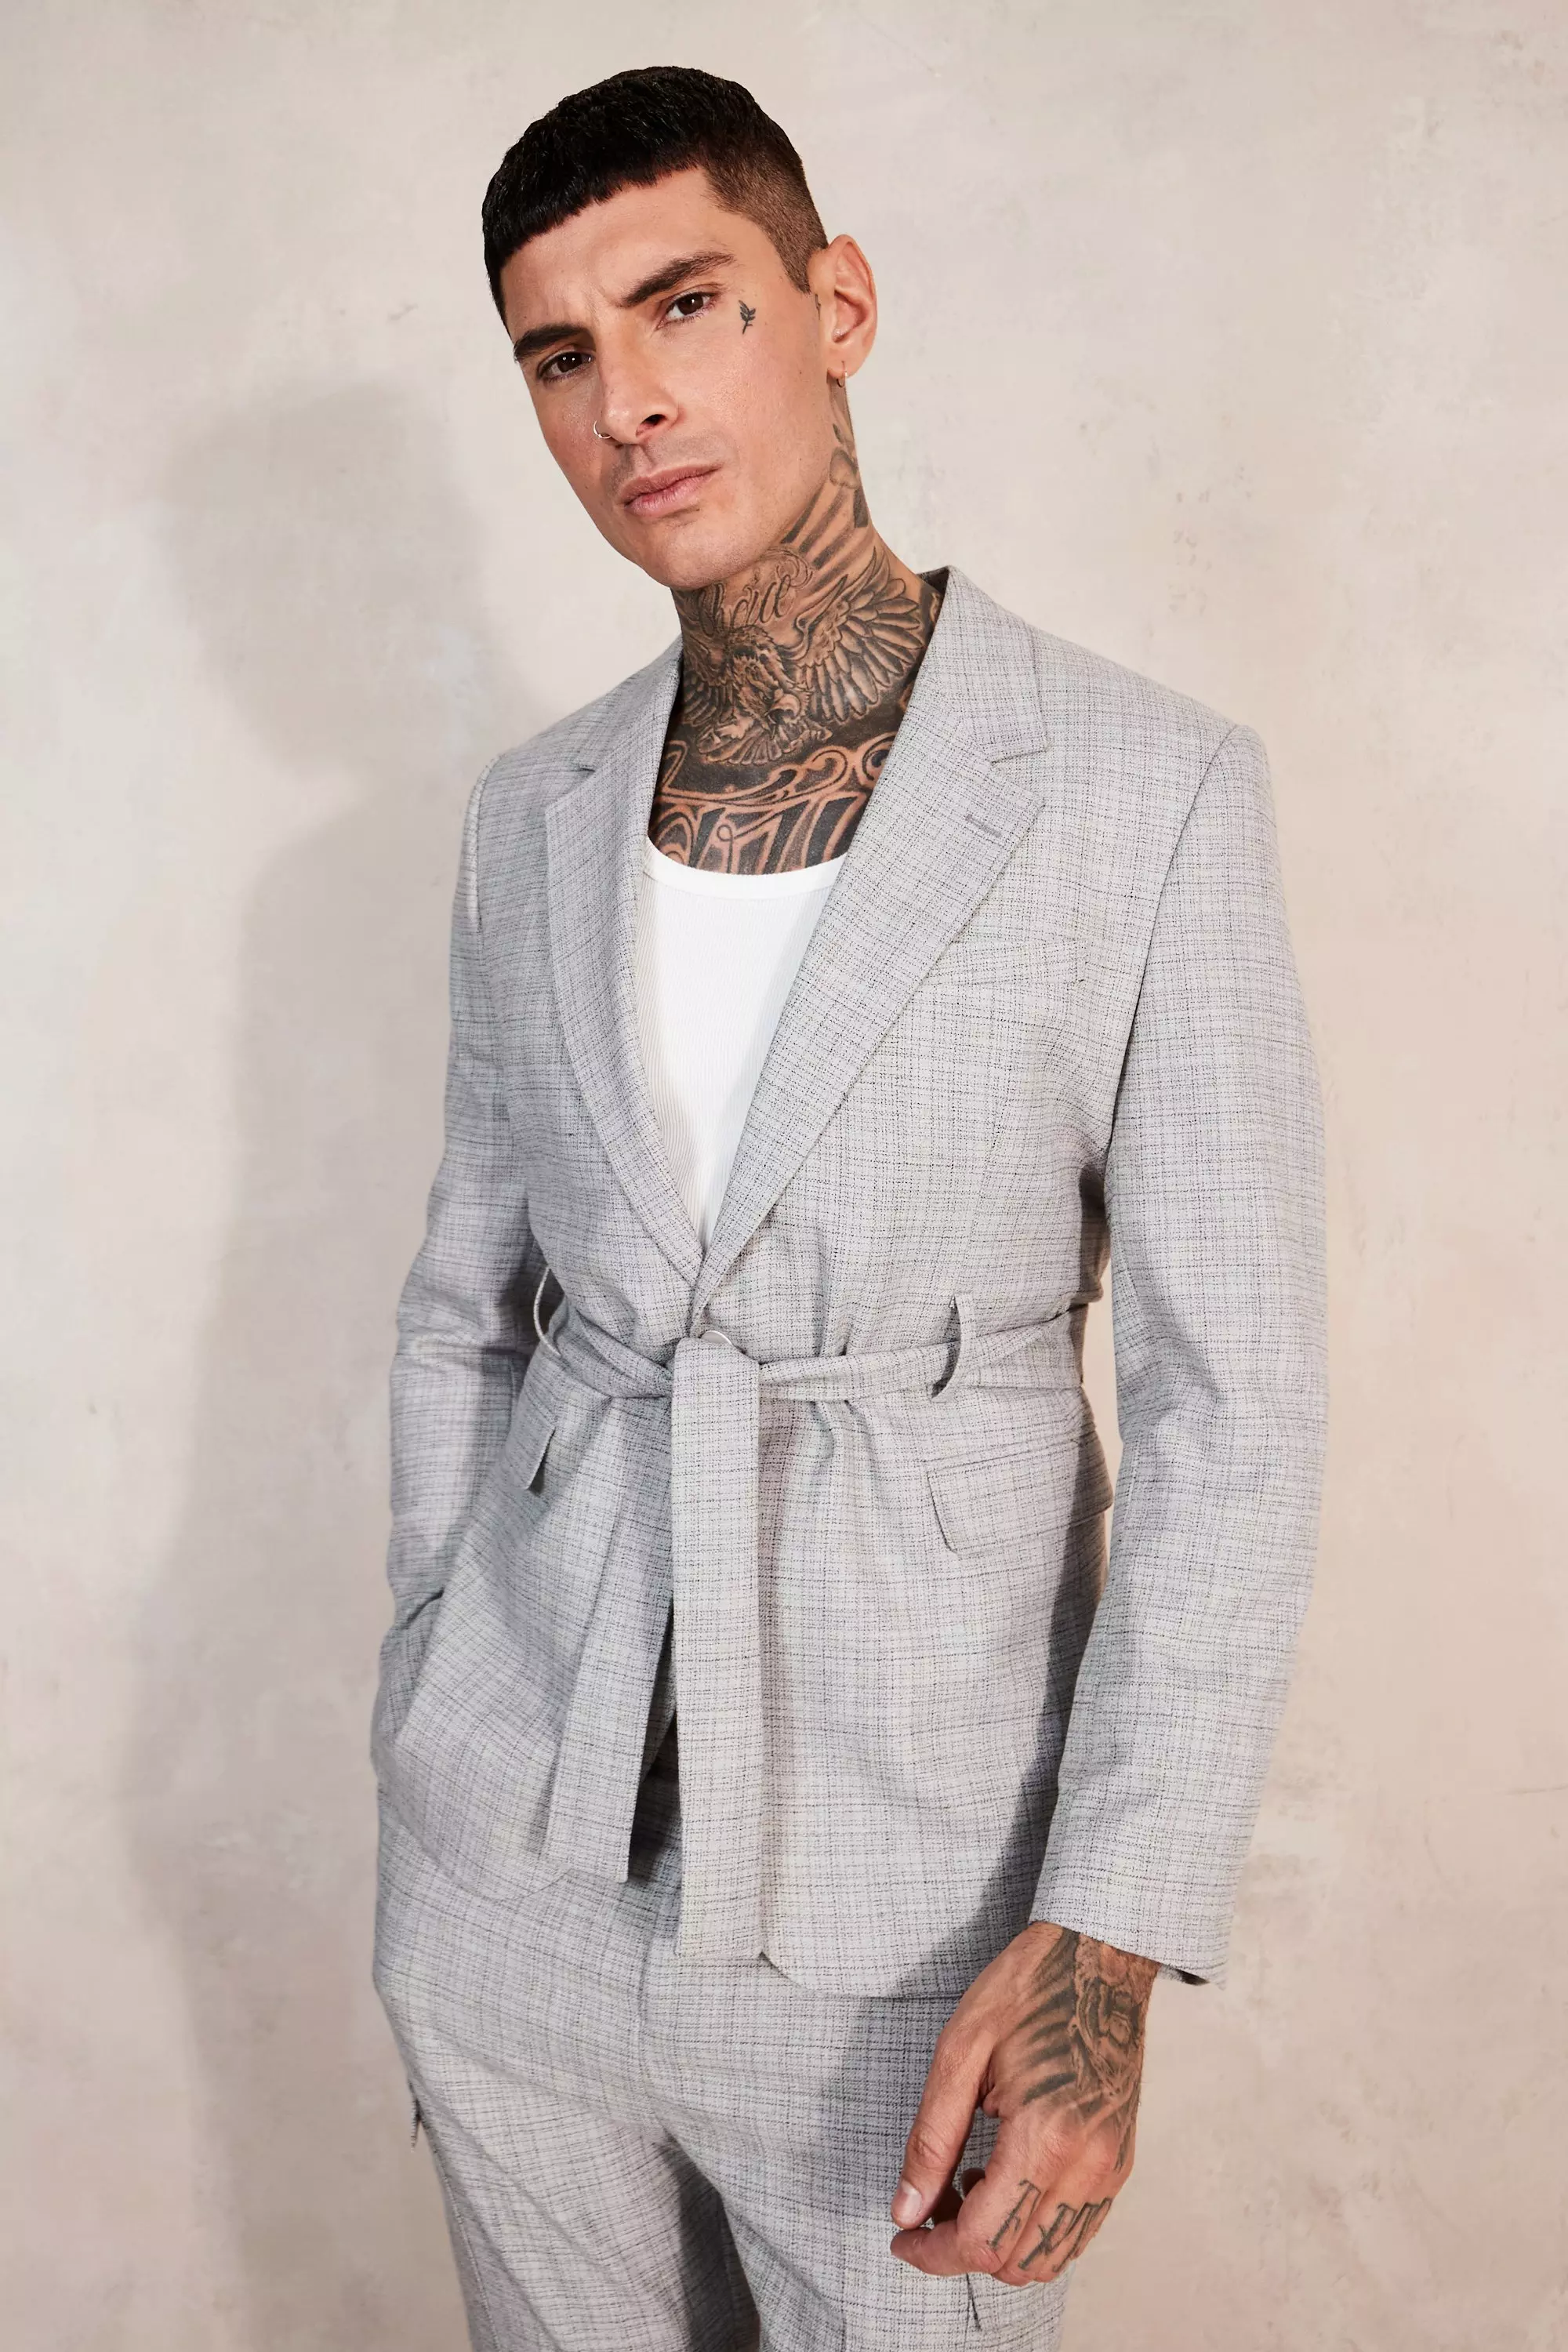 Relaxed Tie Front Cargo Pocket Suit Jacket Grey